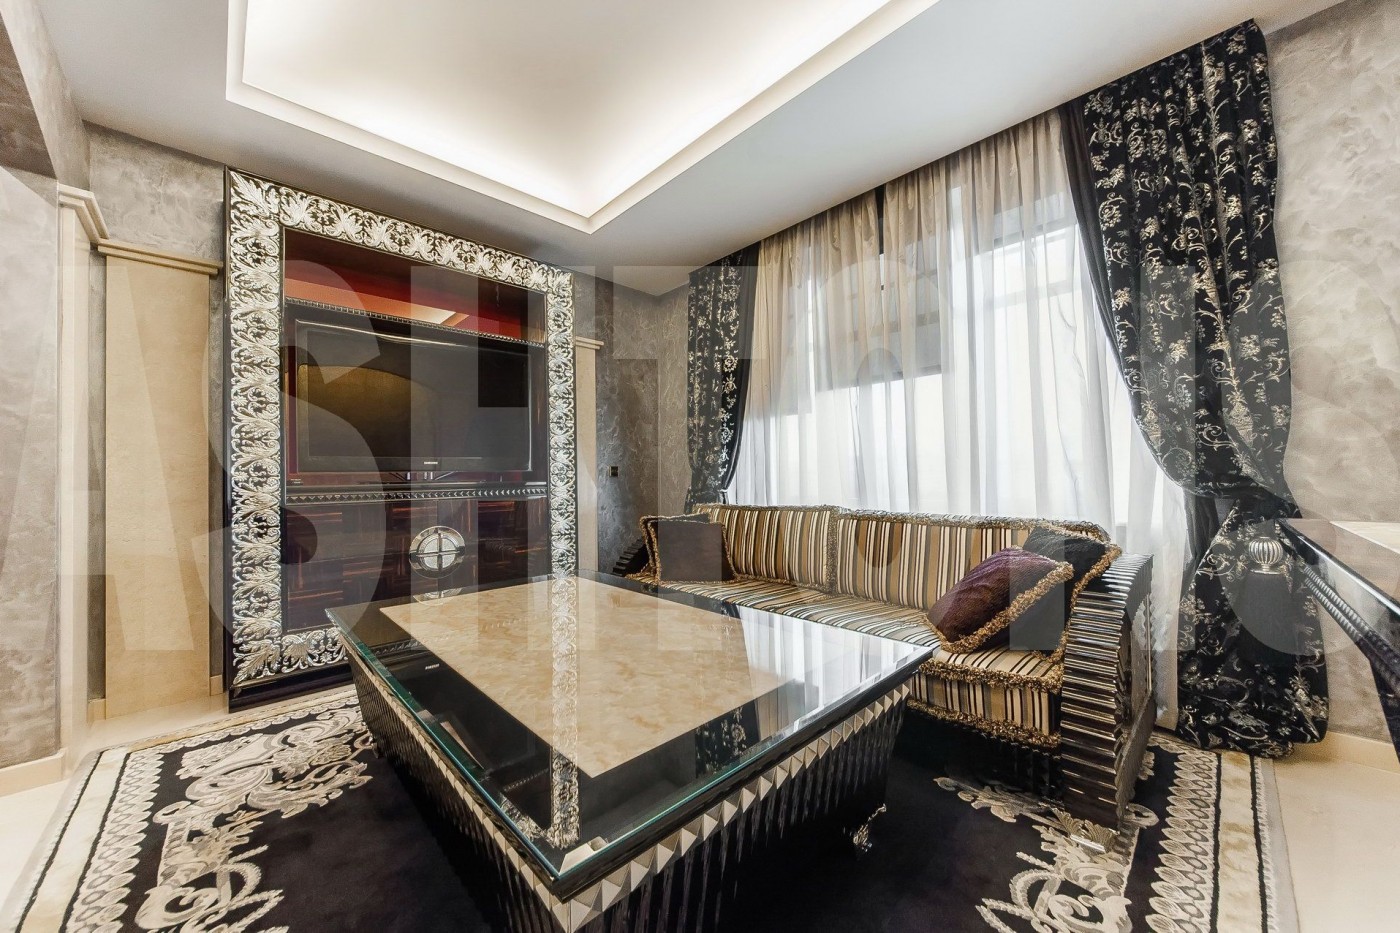 Luxury apartment for rent in the Residential Complex Novopeskovsky by ASHTONS INTERNATIONAL REALTY